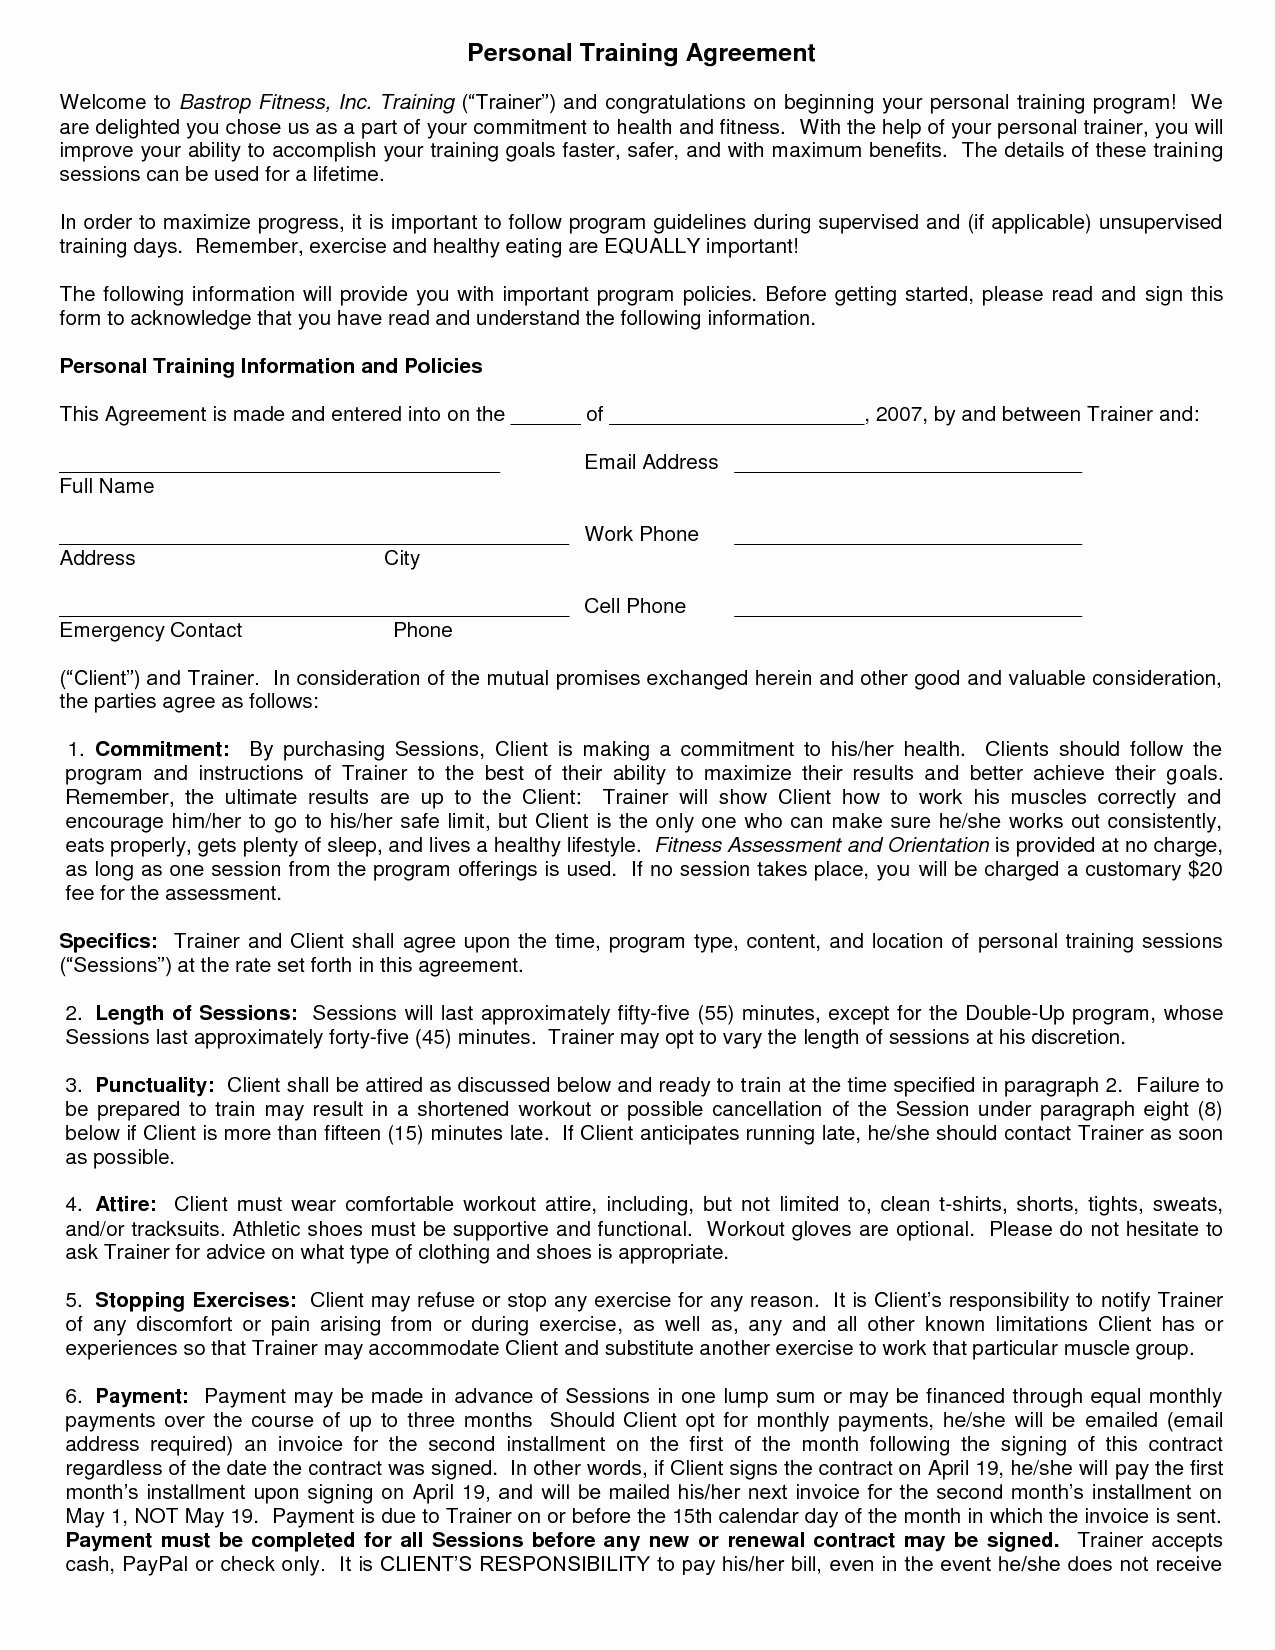 Personal Training Service Agreement Excellent 27